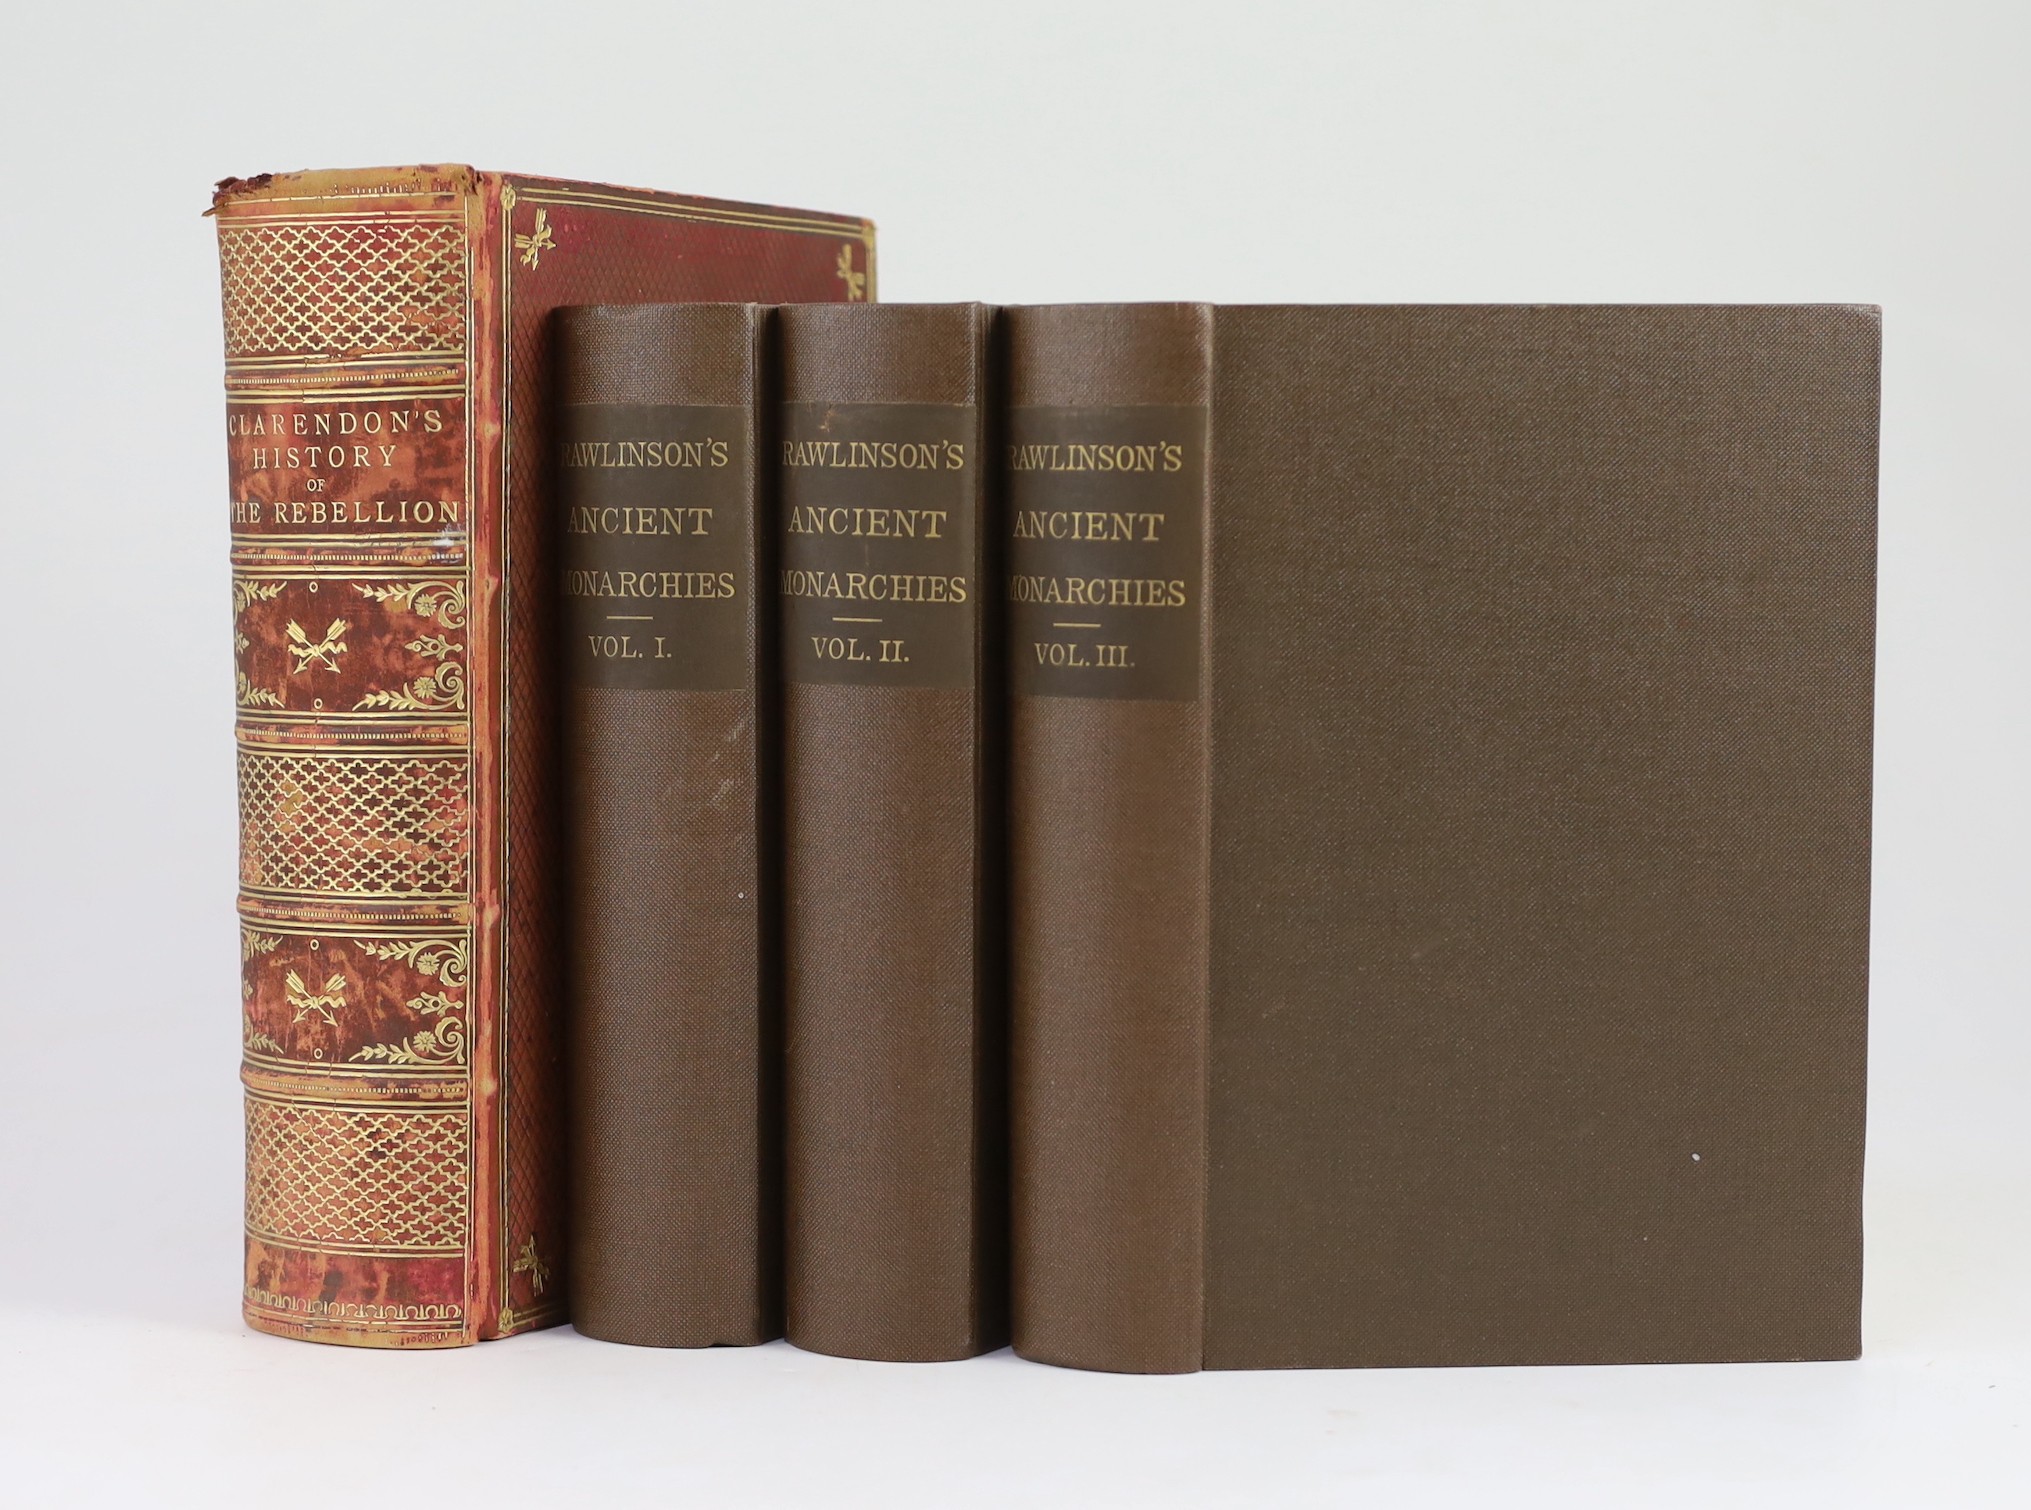 Rawlinson, George - The Five Great Monarchies of the Ancient Eastern World, 2nd edition, 3 vols, 8vo, rebound cloth, Dodd, Mead and Company, New York, 1881 and Clarendon, Edward Hyde, 1st Earl of - The History of the Reb